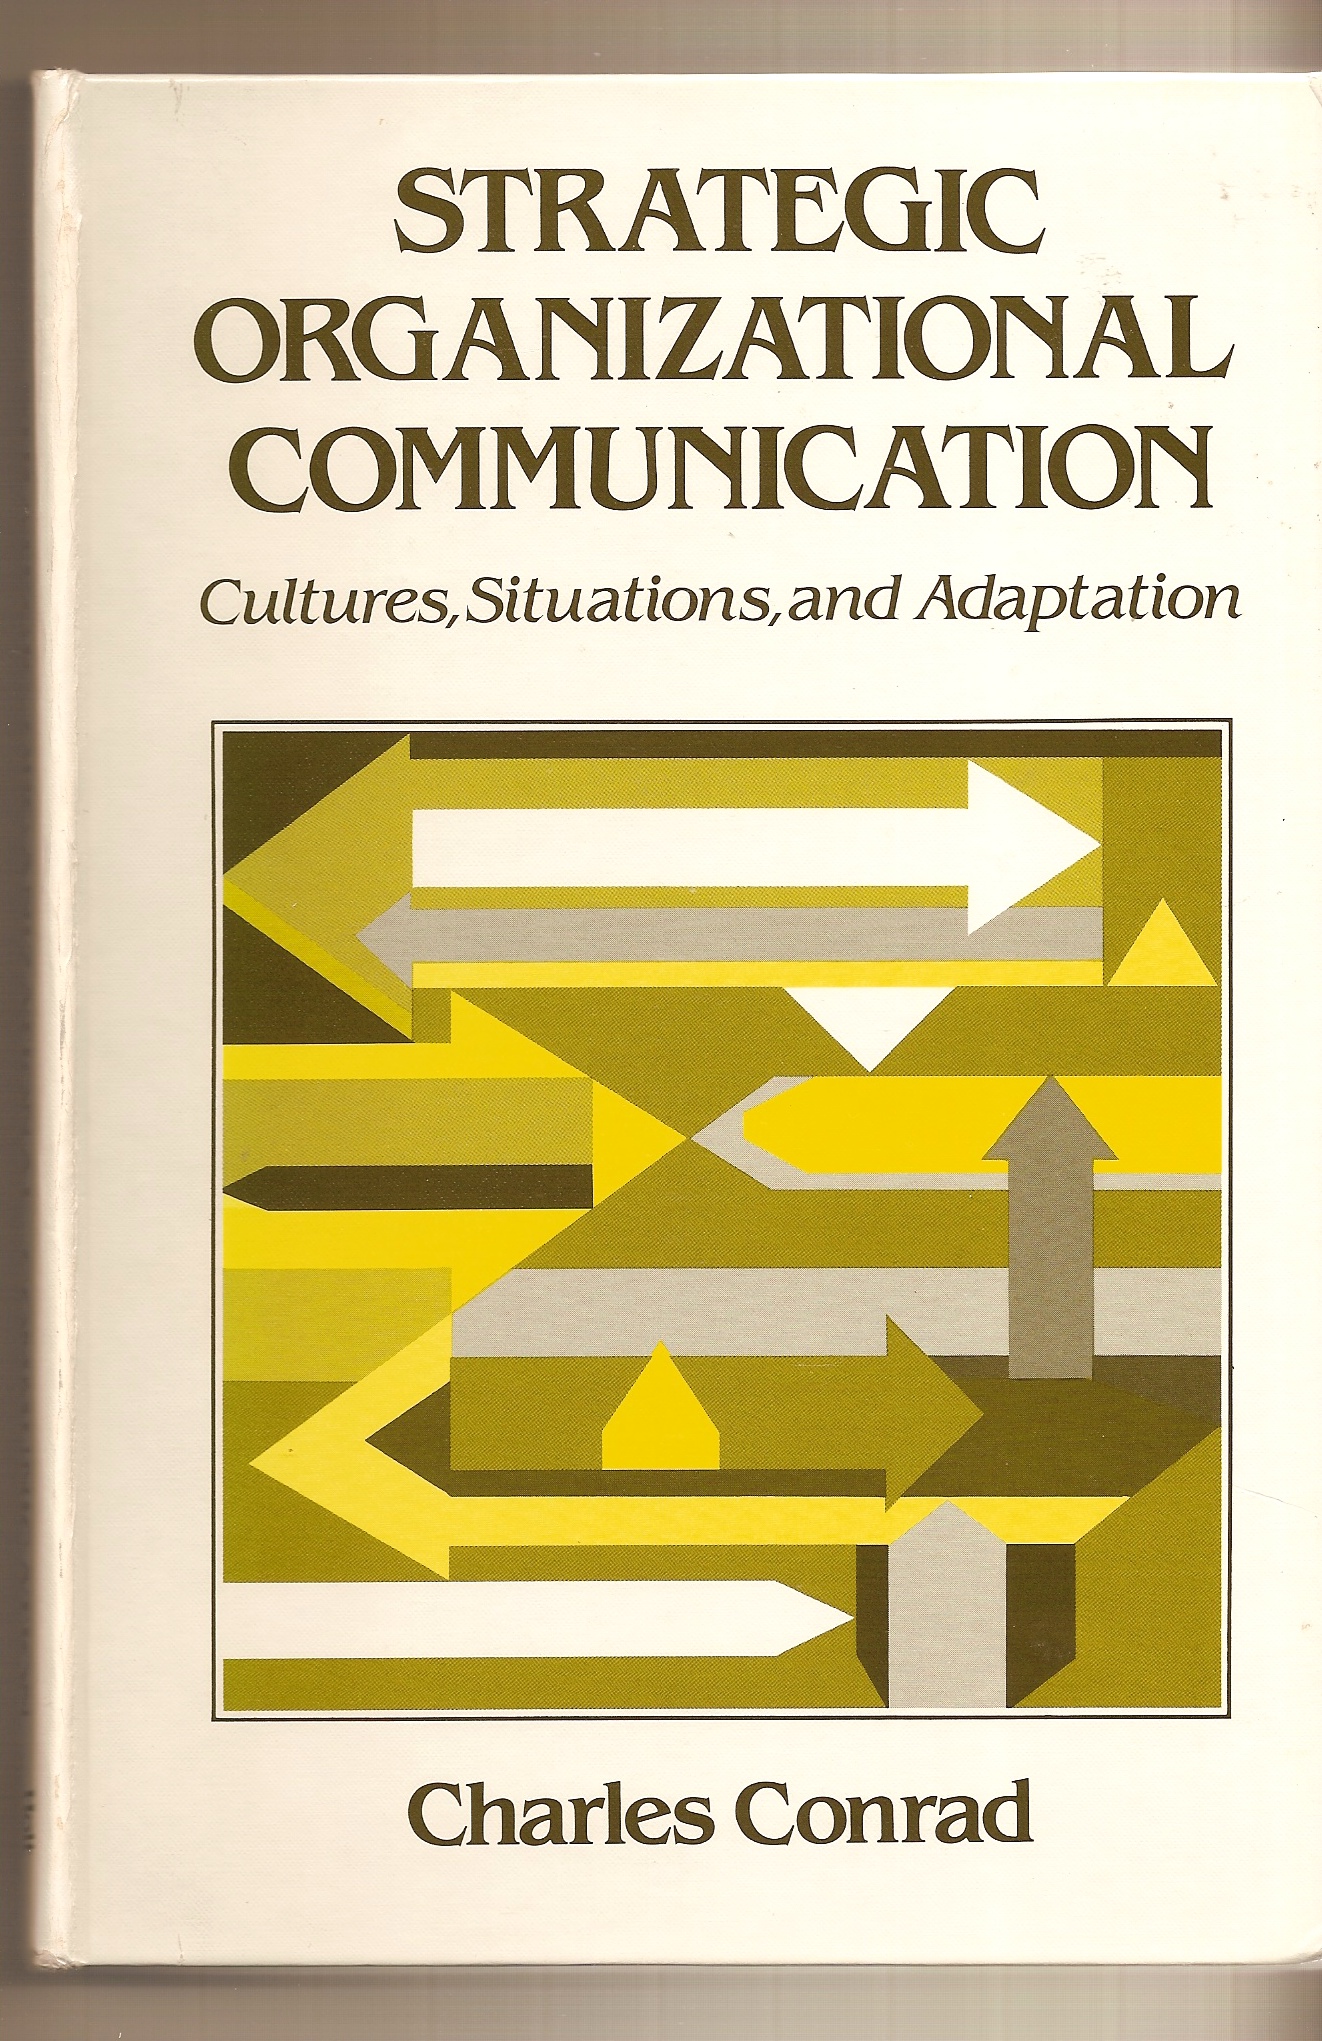 CONRAD, CHARLES - Strategic Organizational Communication Cultures, Situations, and Adaptation